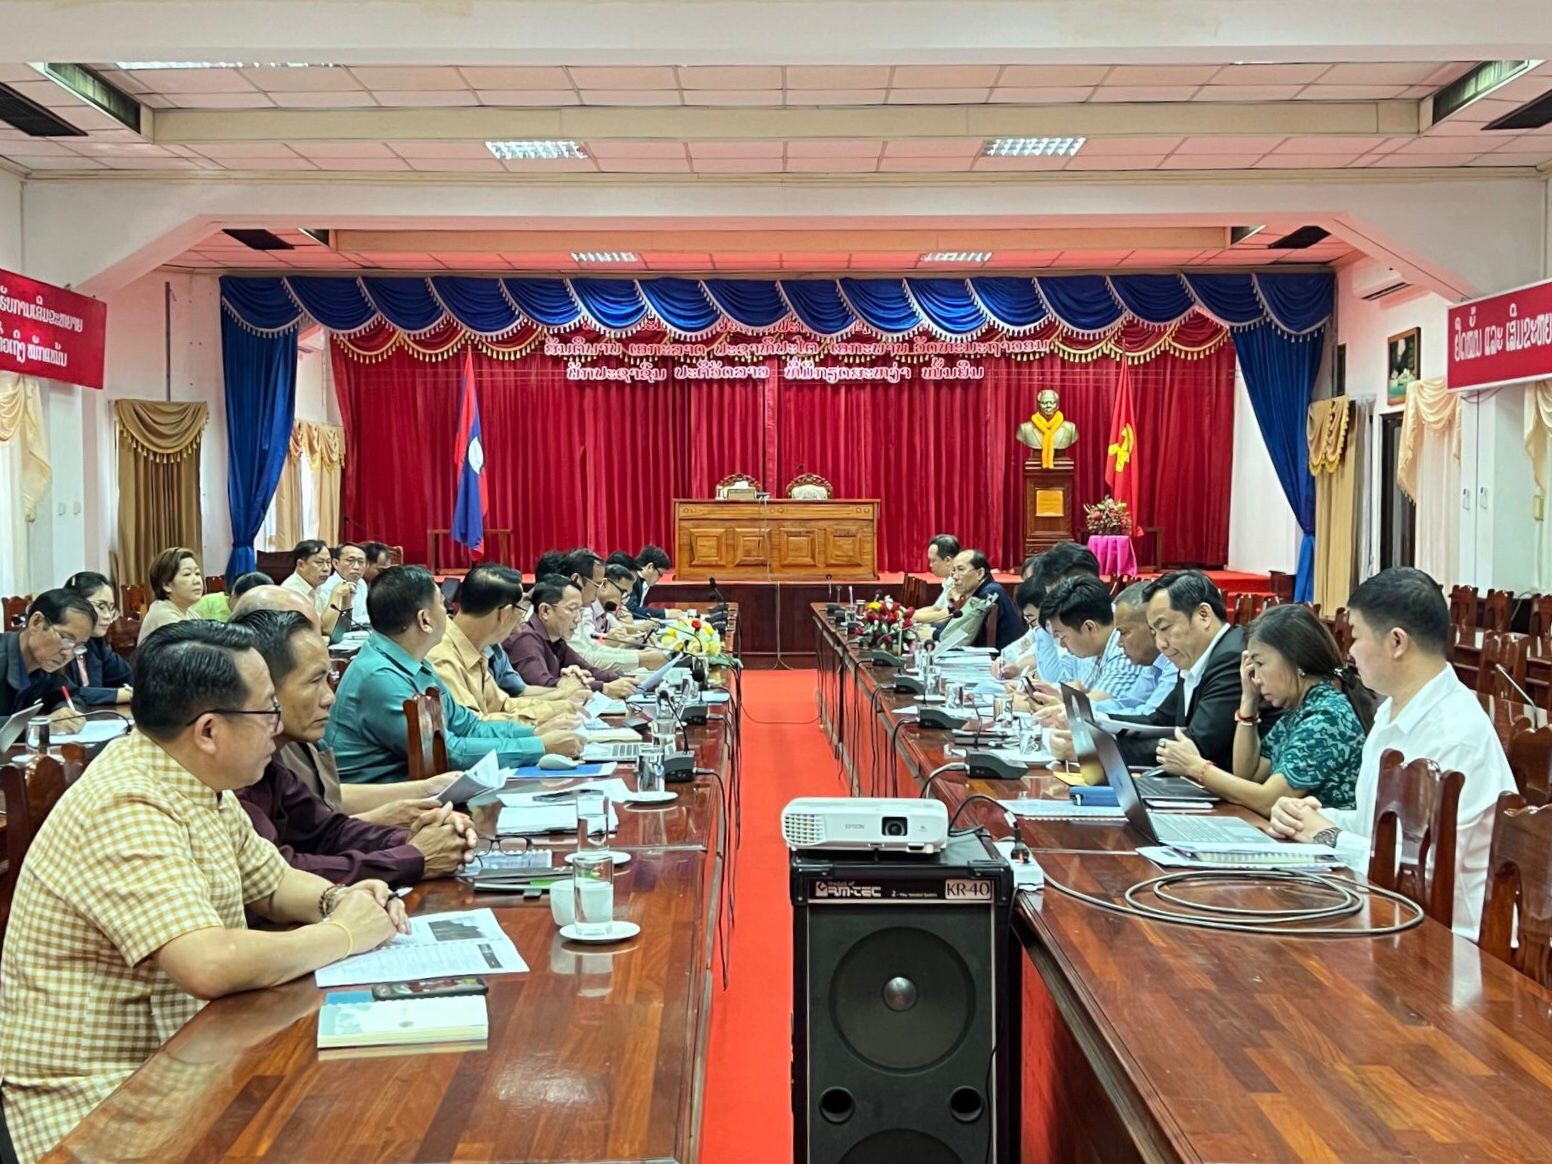 “Green recovery” after the COVID-19 pandemic: Laos and Vietnam renew the dialog on conserving nature for humankind together